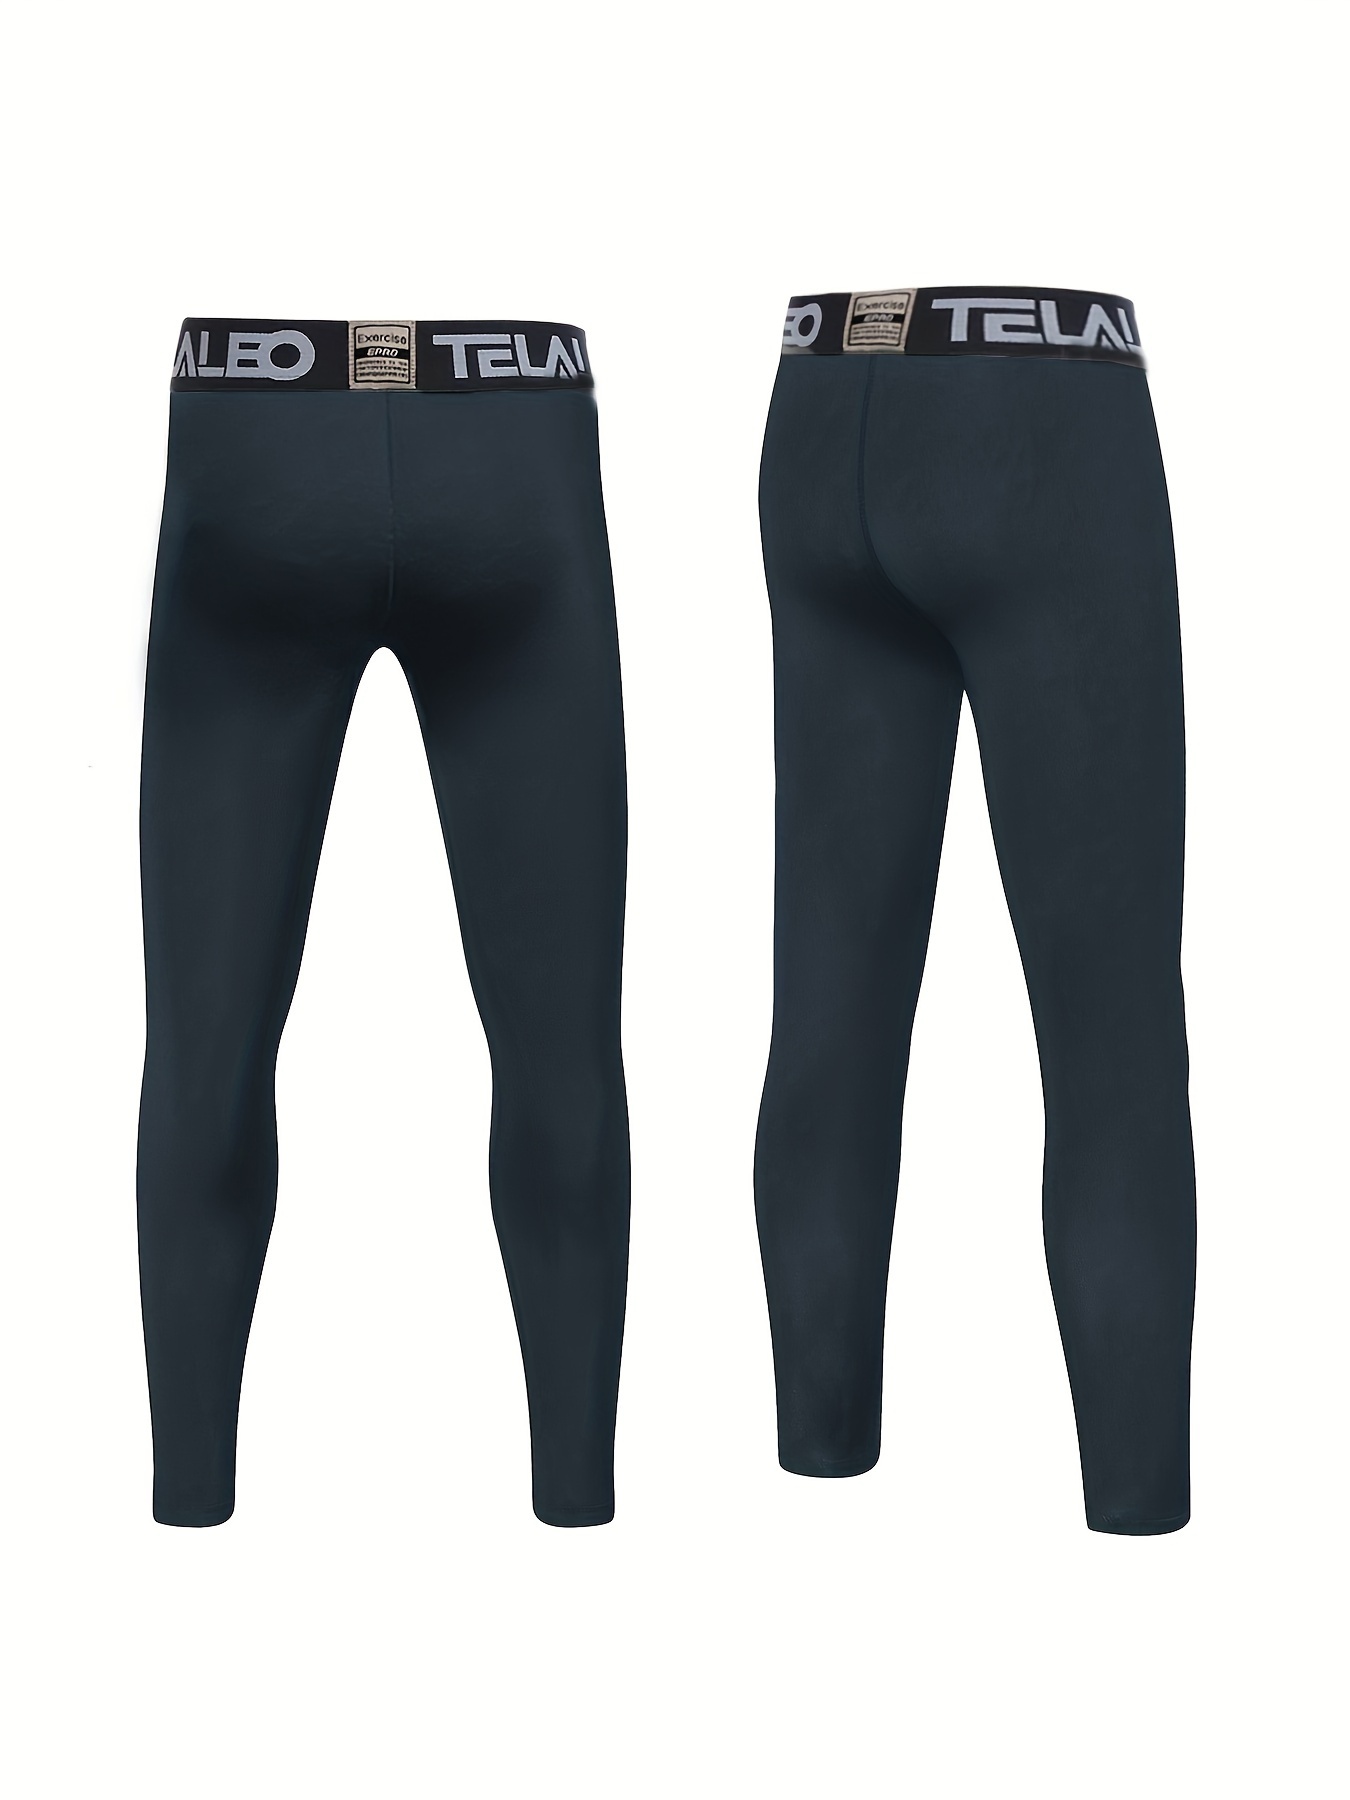  TELALEO 4 Pack Boys' Youth Compression Leggings Tights